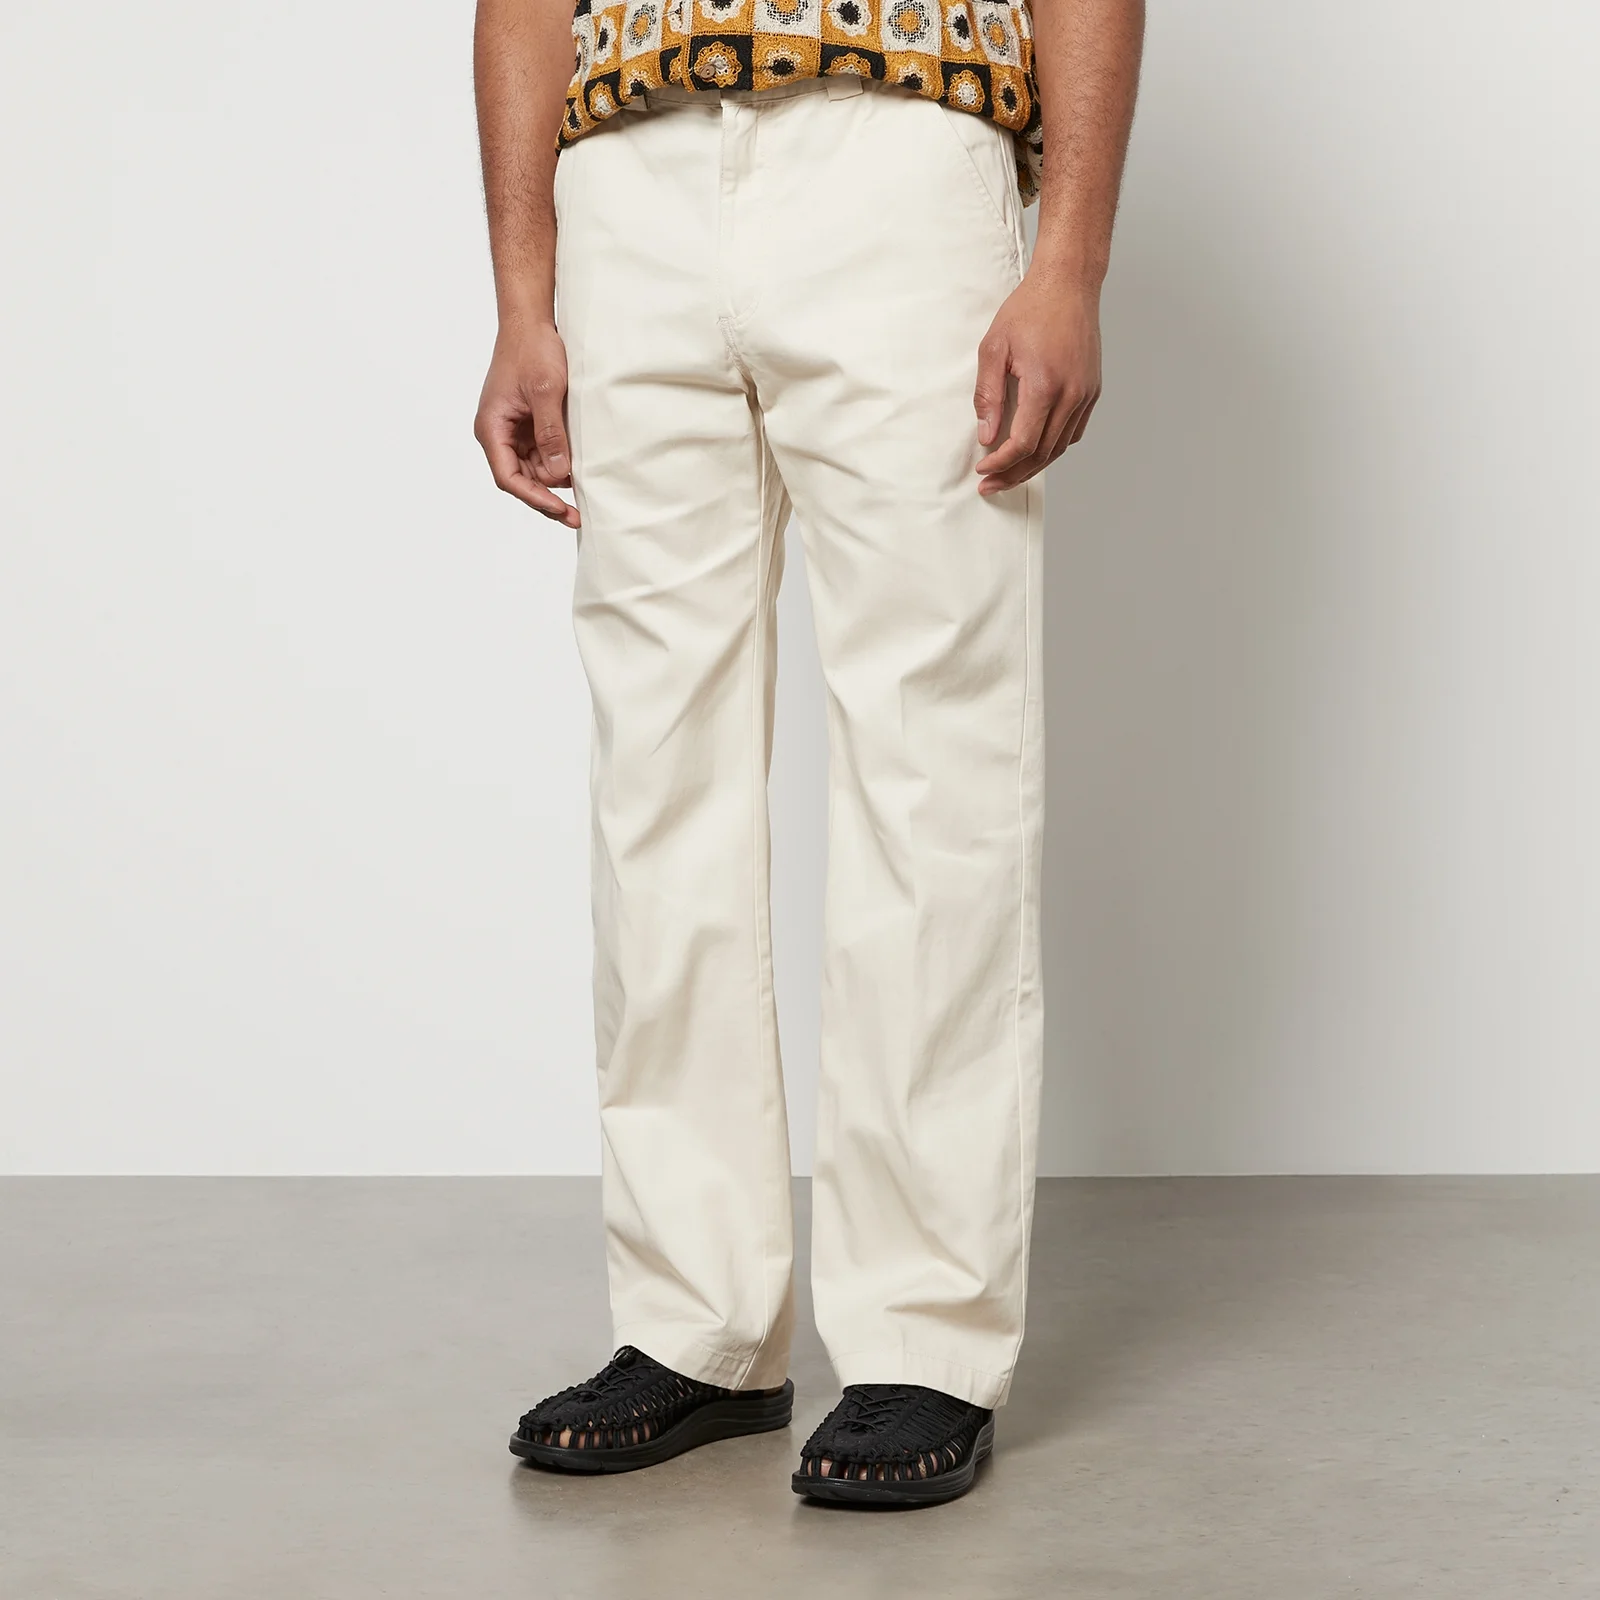 Percival Stay Press Auxiliary Cotton-Twill Trousers Image 1